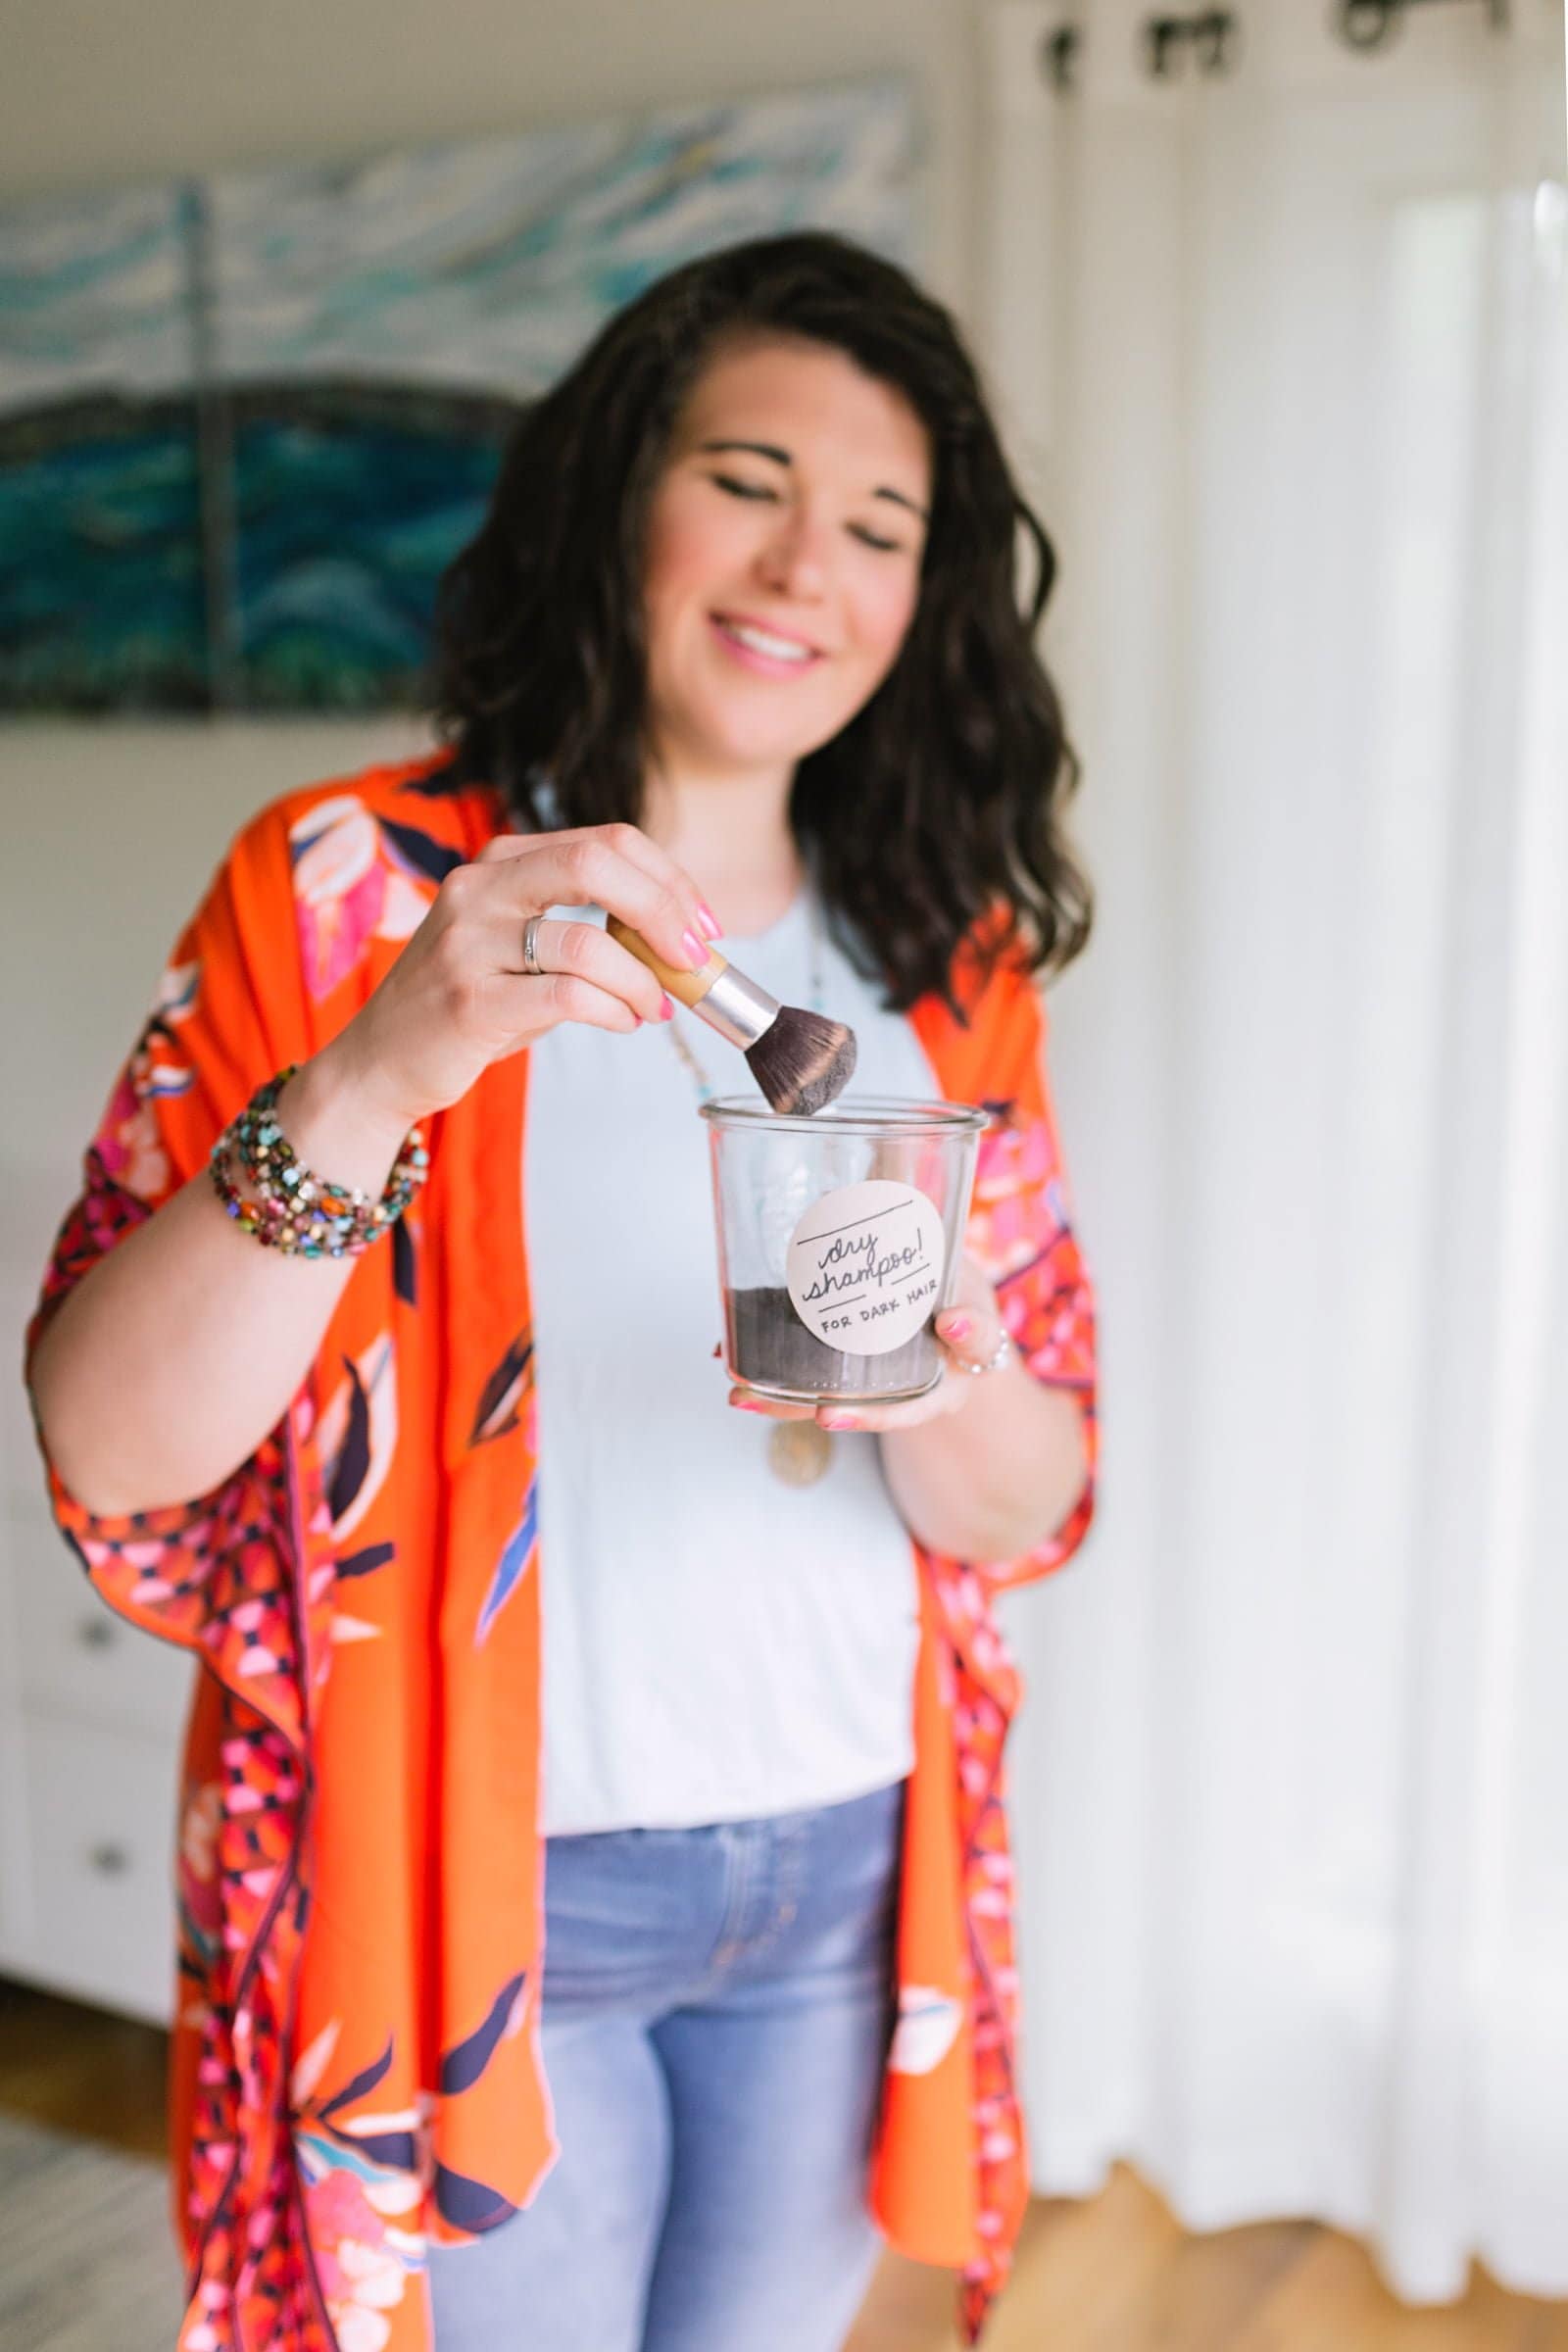 Brunette woman in a neutral top and orange kimono using a brush to mix up some DIY dry shampoo.